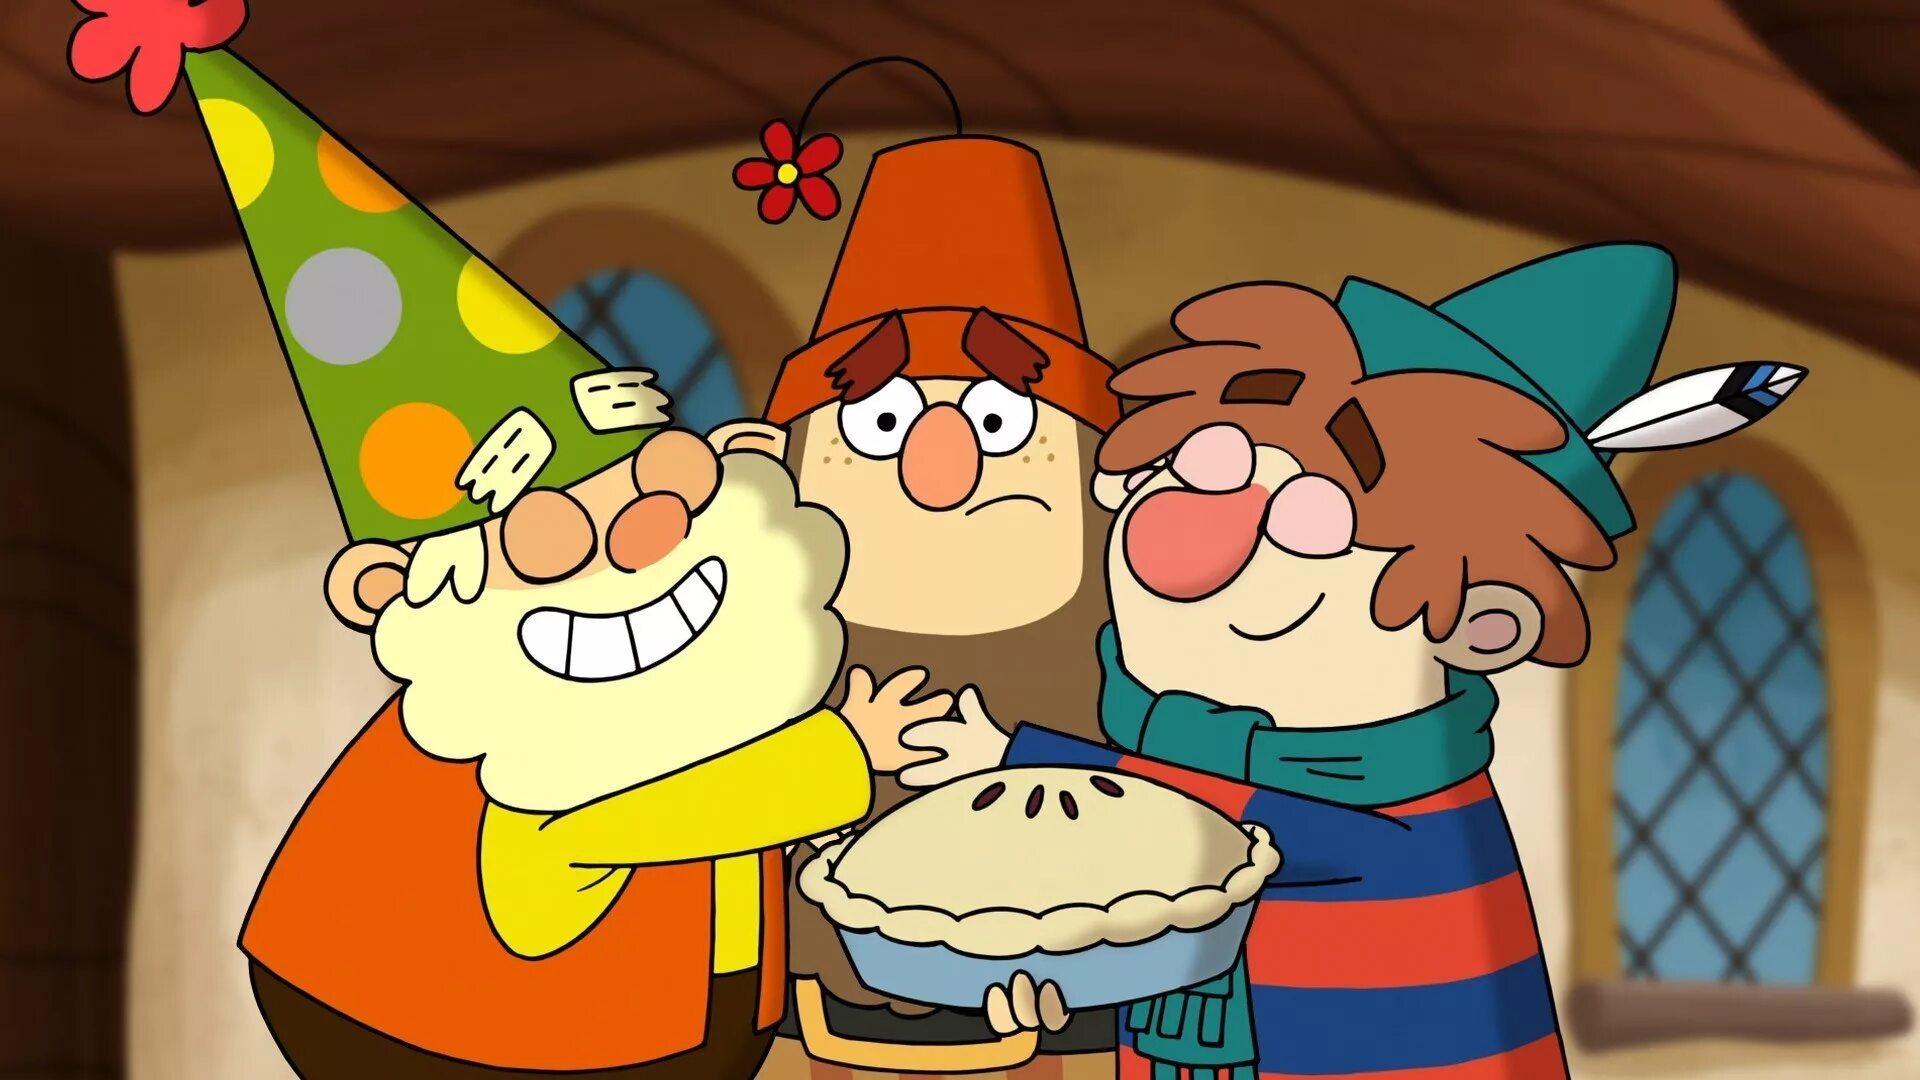 The 7d. The 7d Sneezy. The 7d Sneezy and Sleepy. The 7d Dopey.